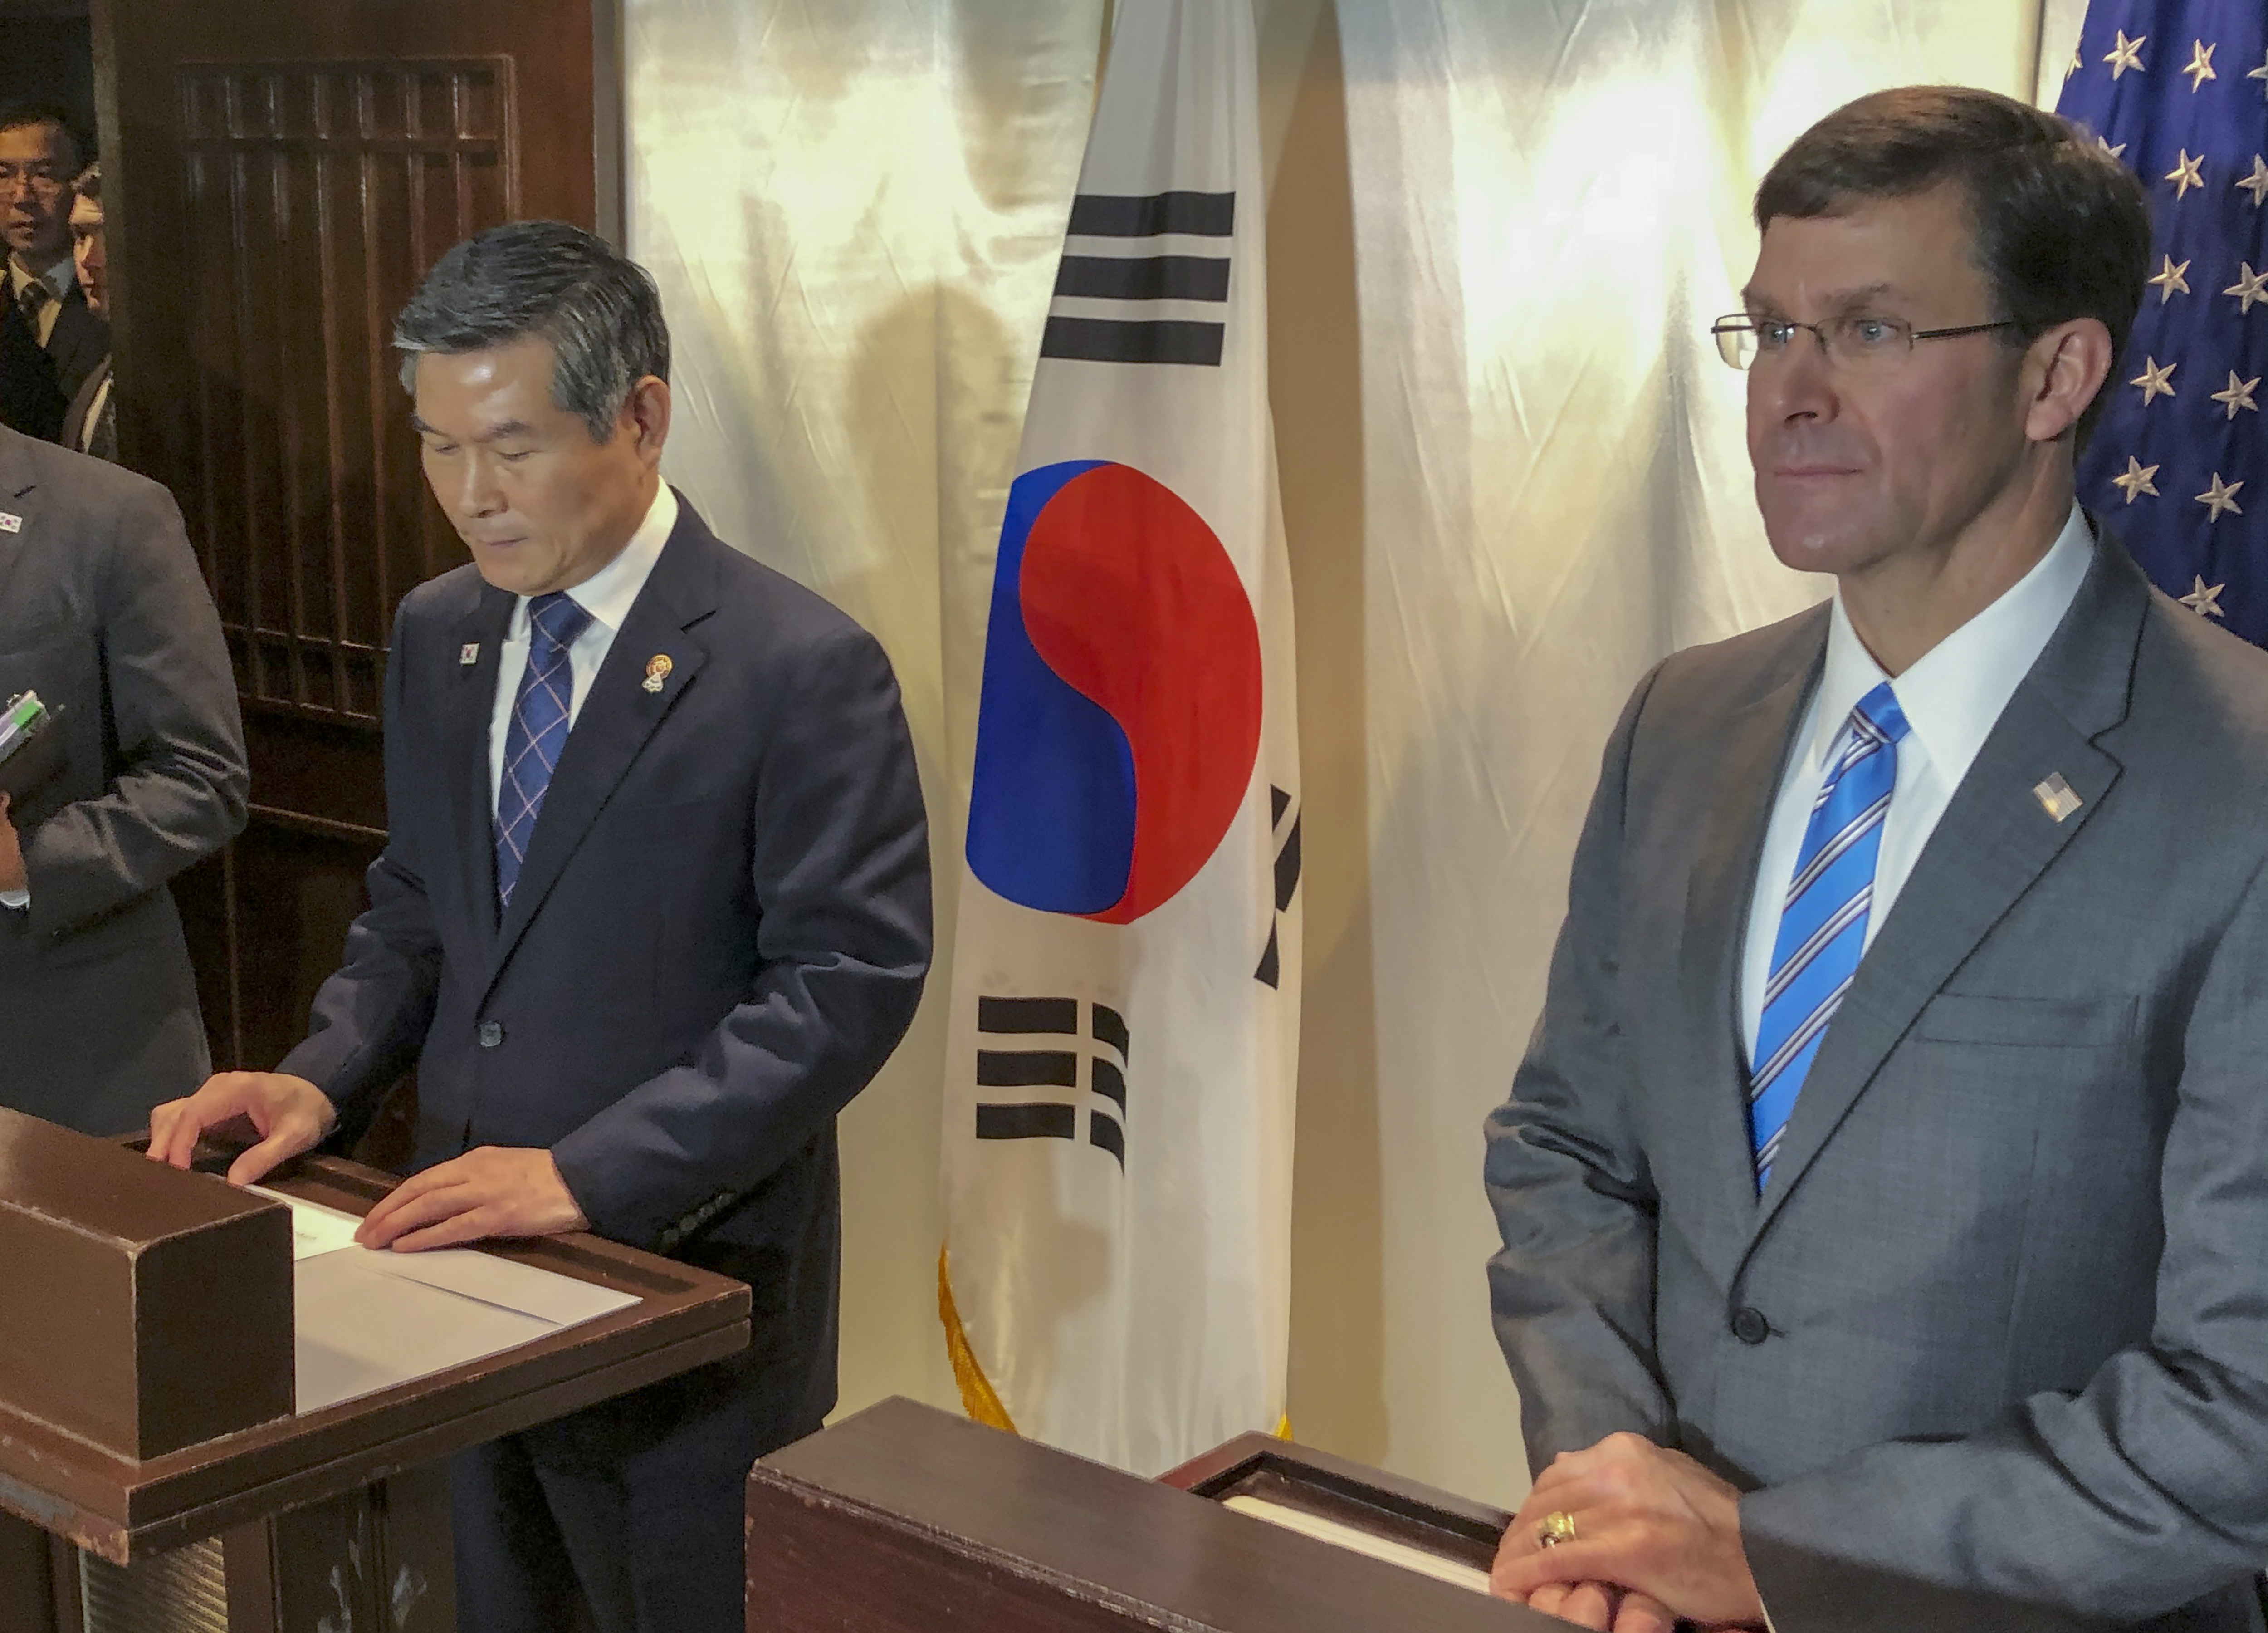 U.S. Defense Secretary Mark Esper, right, and South Korea defense Minister Jeong Kyeong-doo attend a press conference in Bangkok, Thailand, Sunday, Nov. 17, 2019. Esper and his South Korean counterpart announced Sunday that U.S. and South Korea are postponing a joint military air exercise that North Korea has criticized as provocative. (AP Photo/Robert Burns) kim jong un north korea